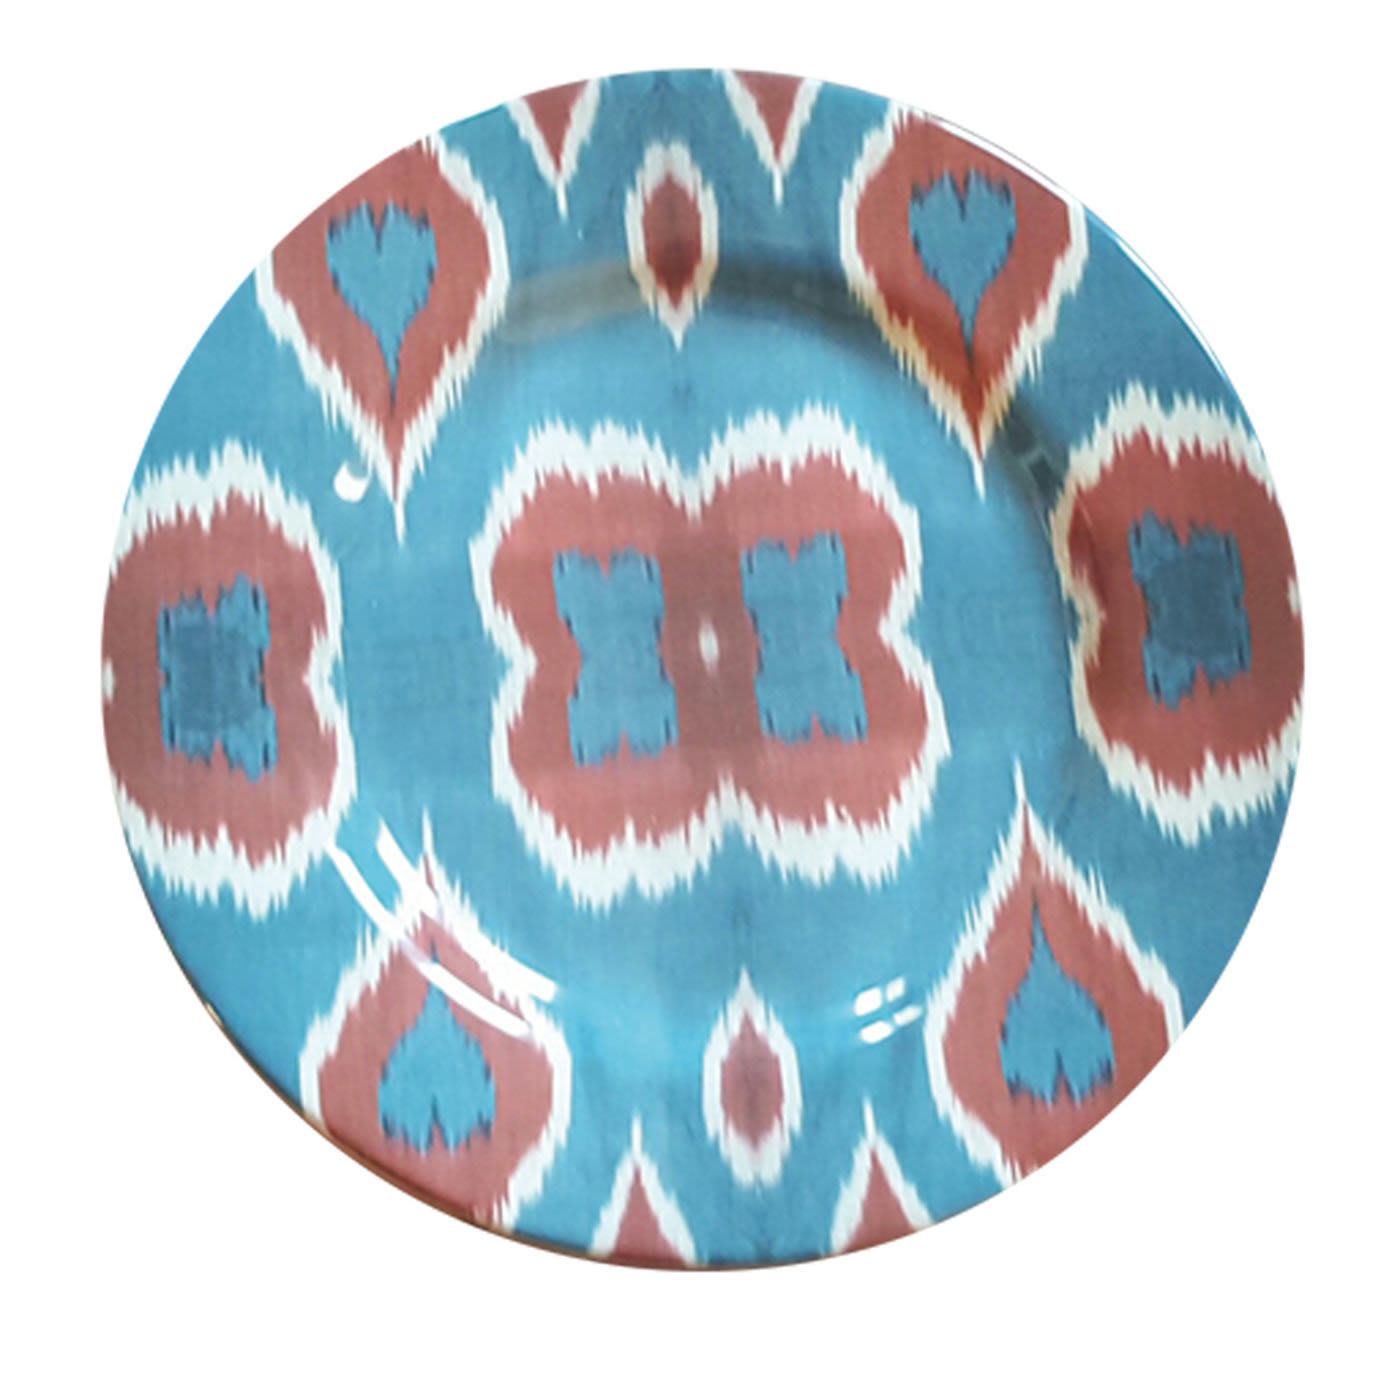 Set of 6 Ikat Ceramics Plates in Red and Blue - Les Ottomans